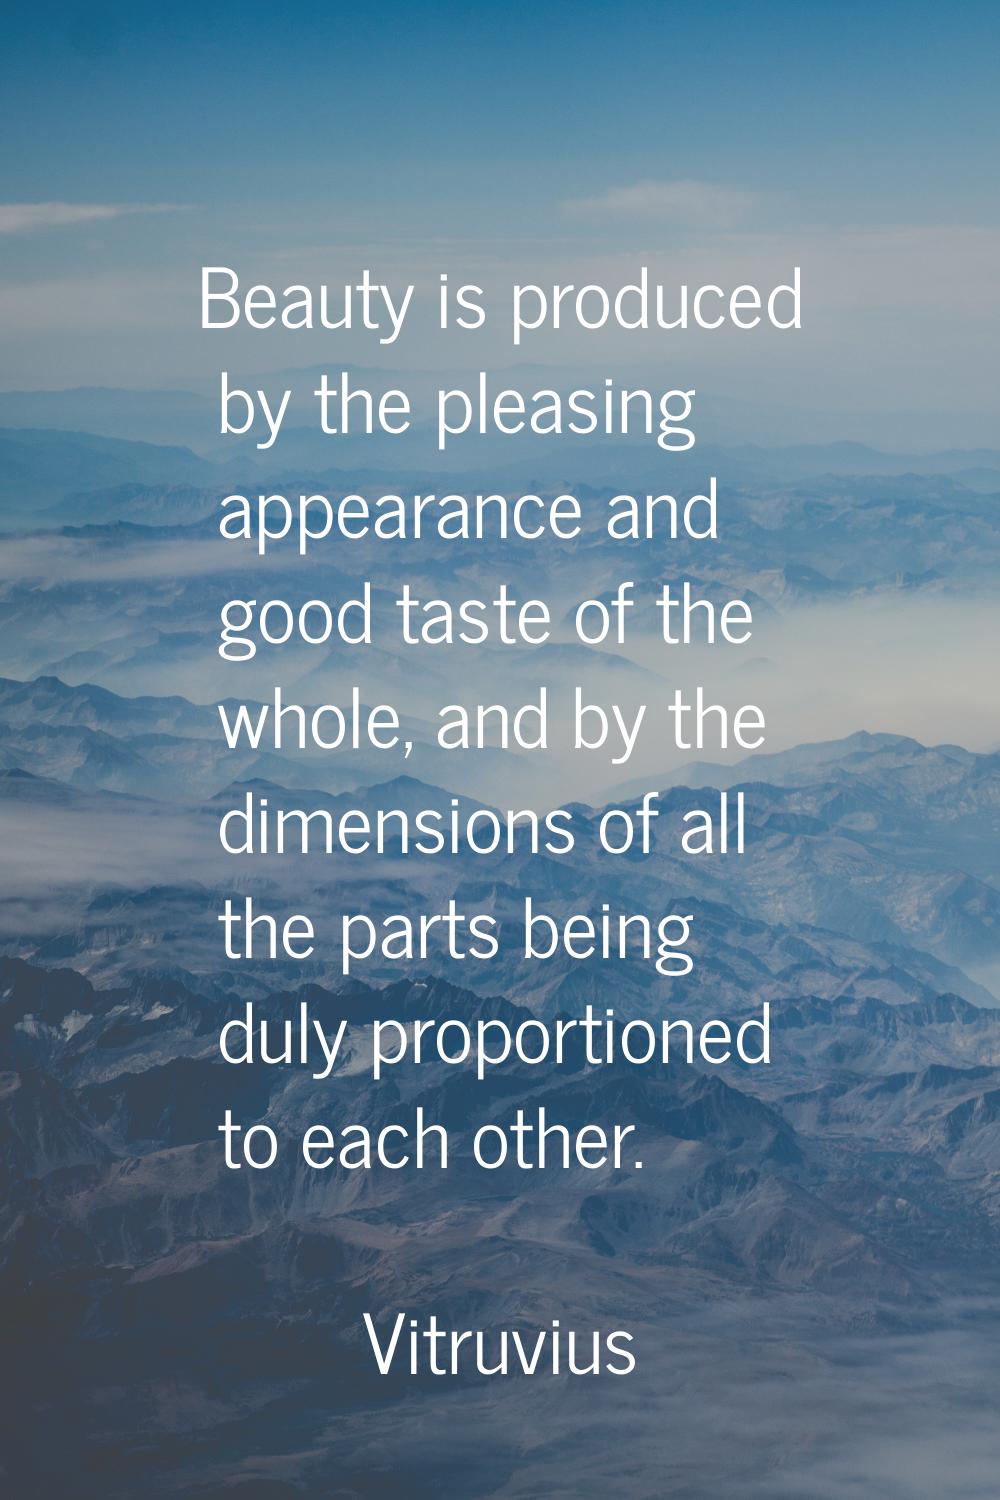 Beauty is produced by the pleasing appearance and good taste of the whole, and by the dimensions of